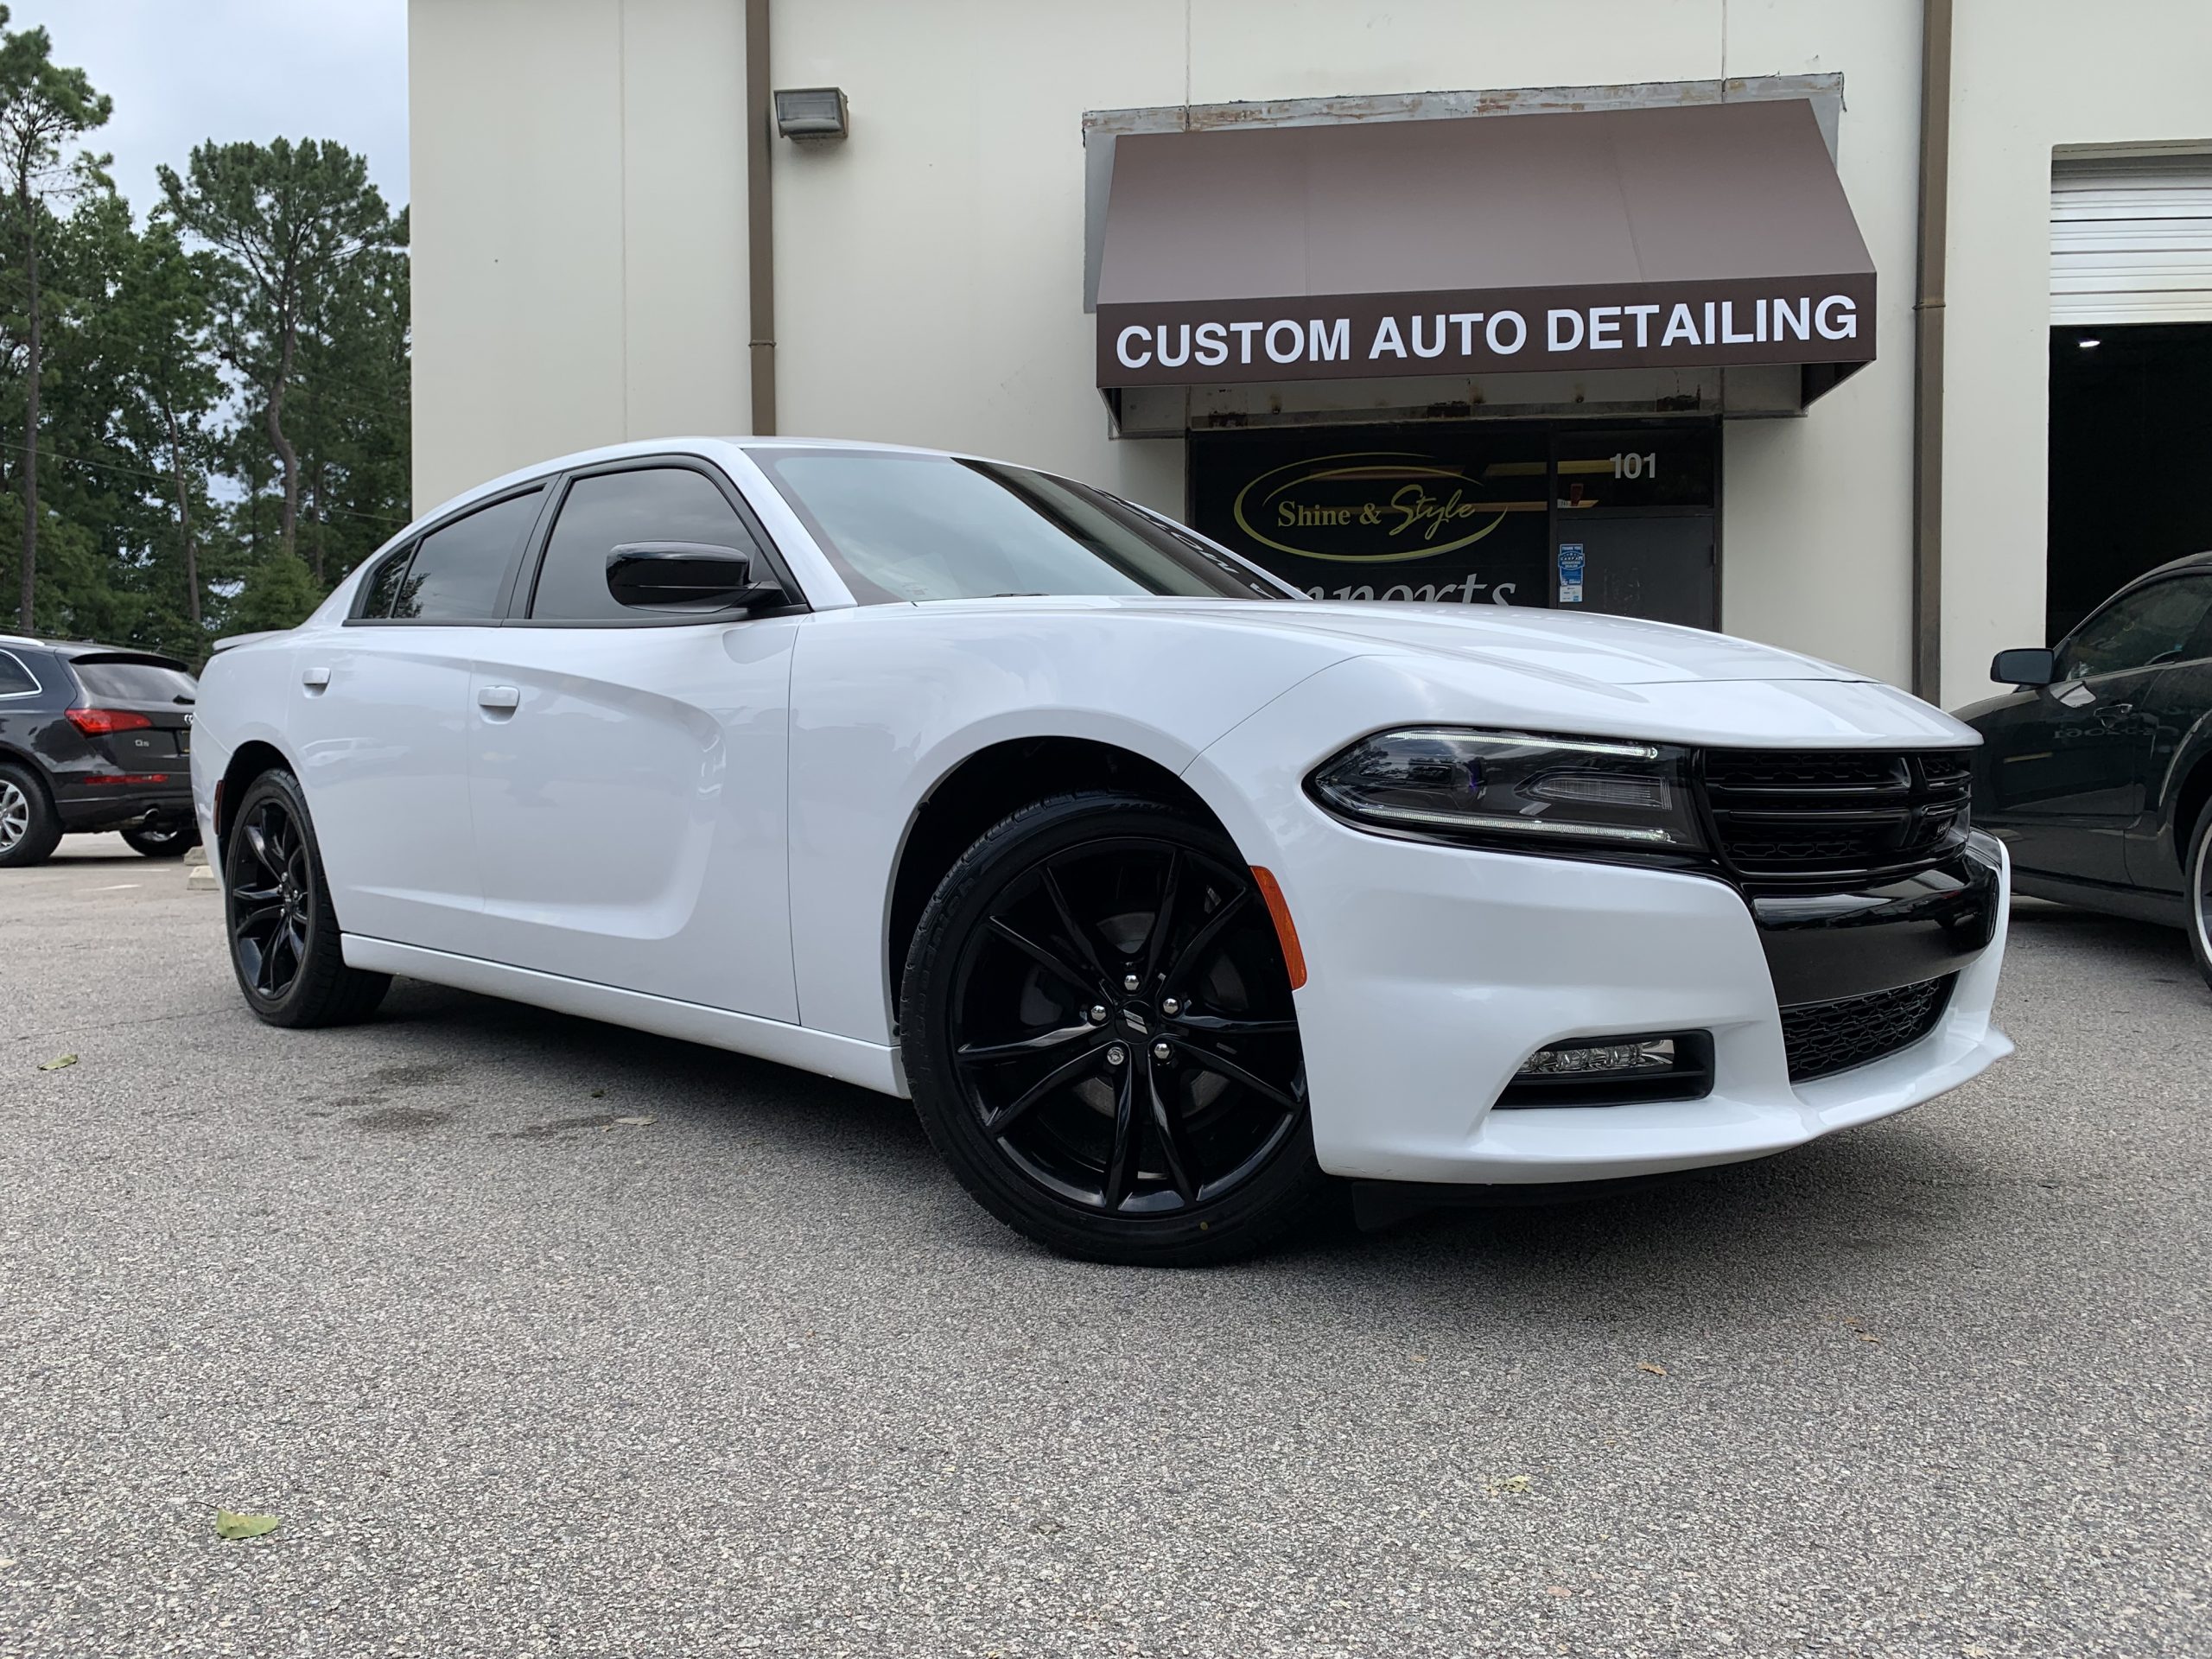 2017 Dodge Charger SXT for sale near Raleigh NC